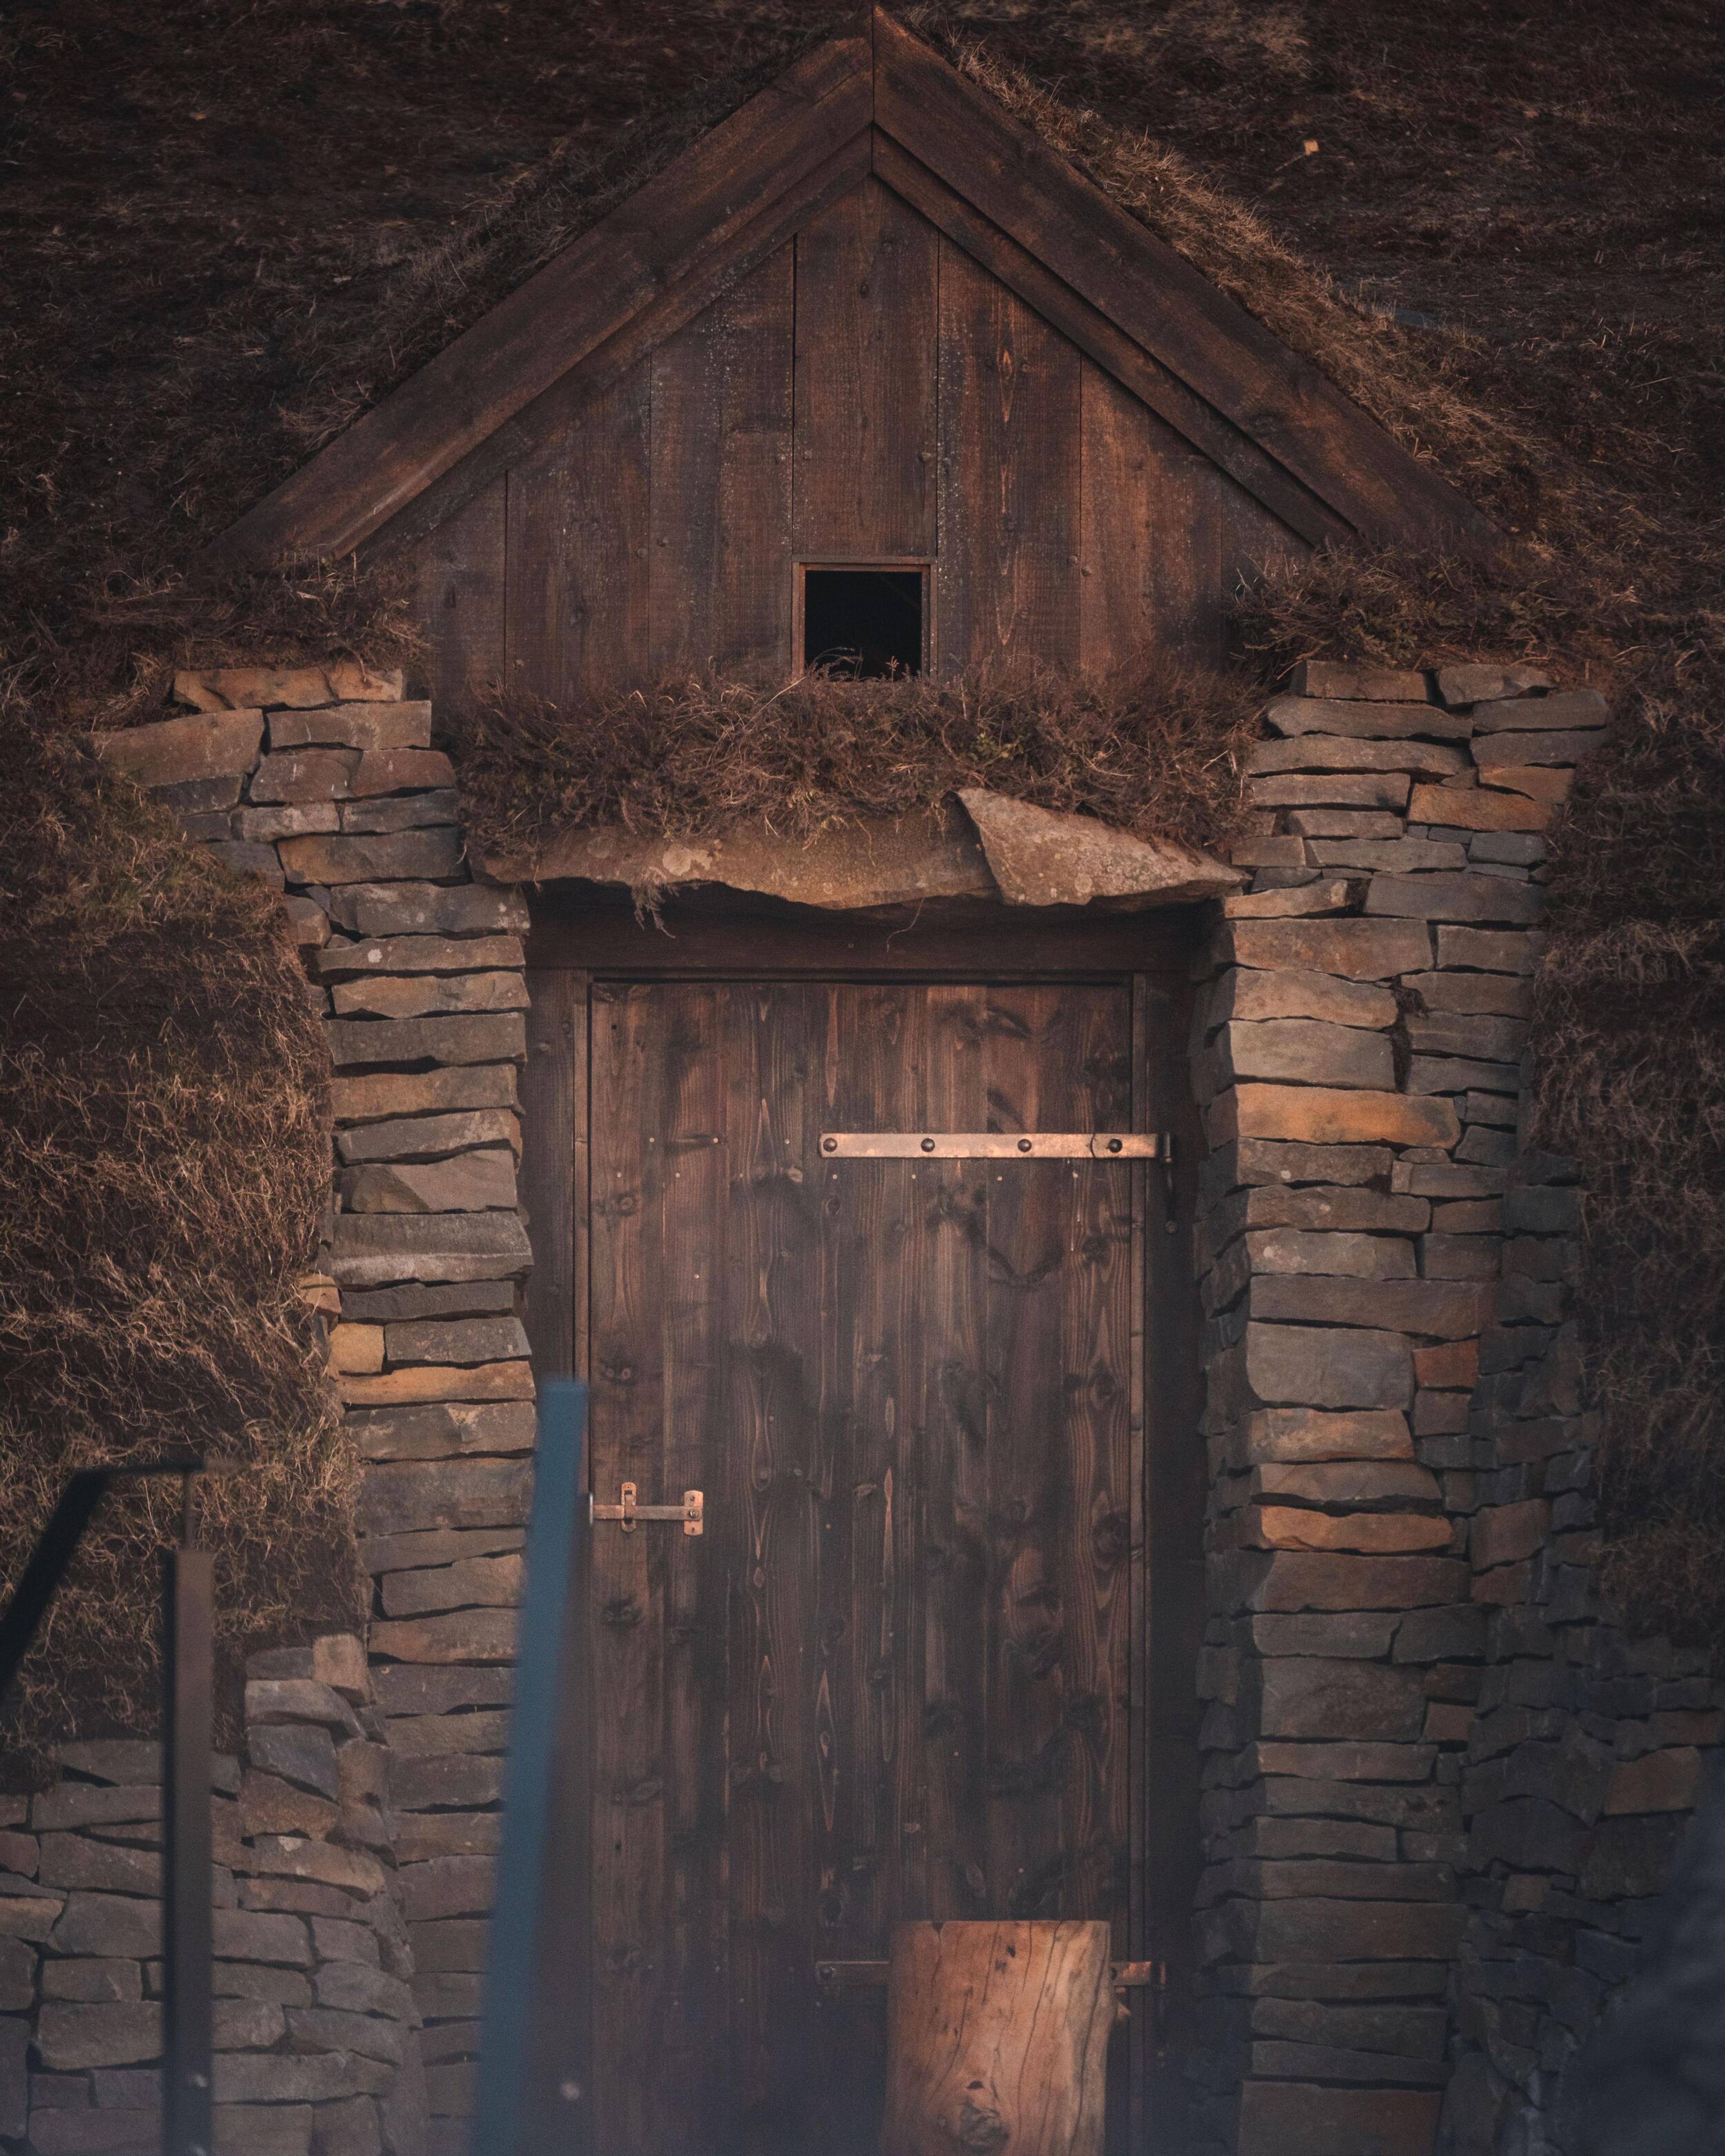 A traditional turf house door at Sky Lagoon Iceland, featuring rustic stone walls and a grass roof, invoking the historic architecture of the region.